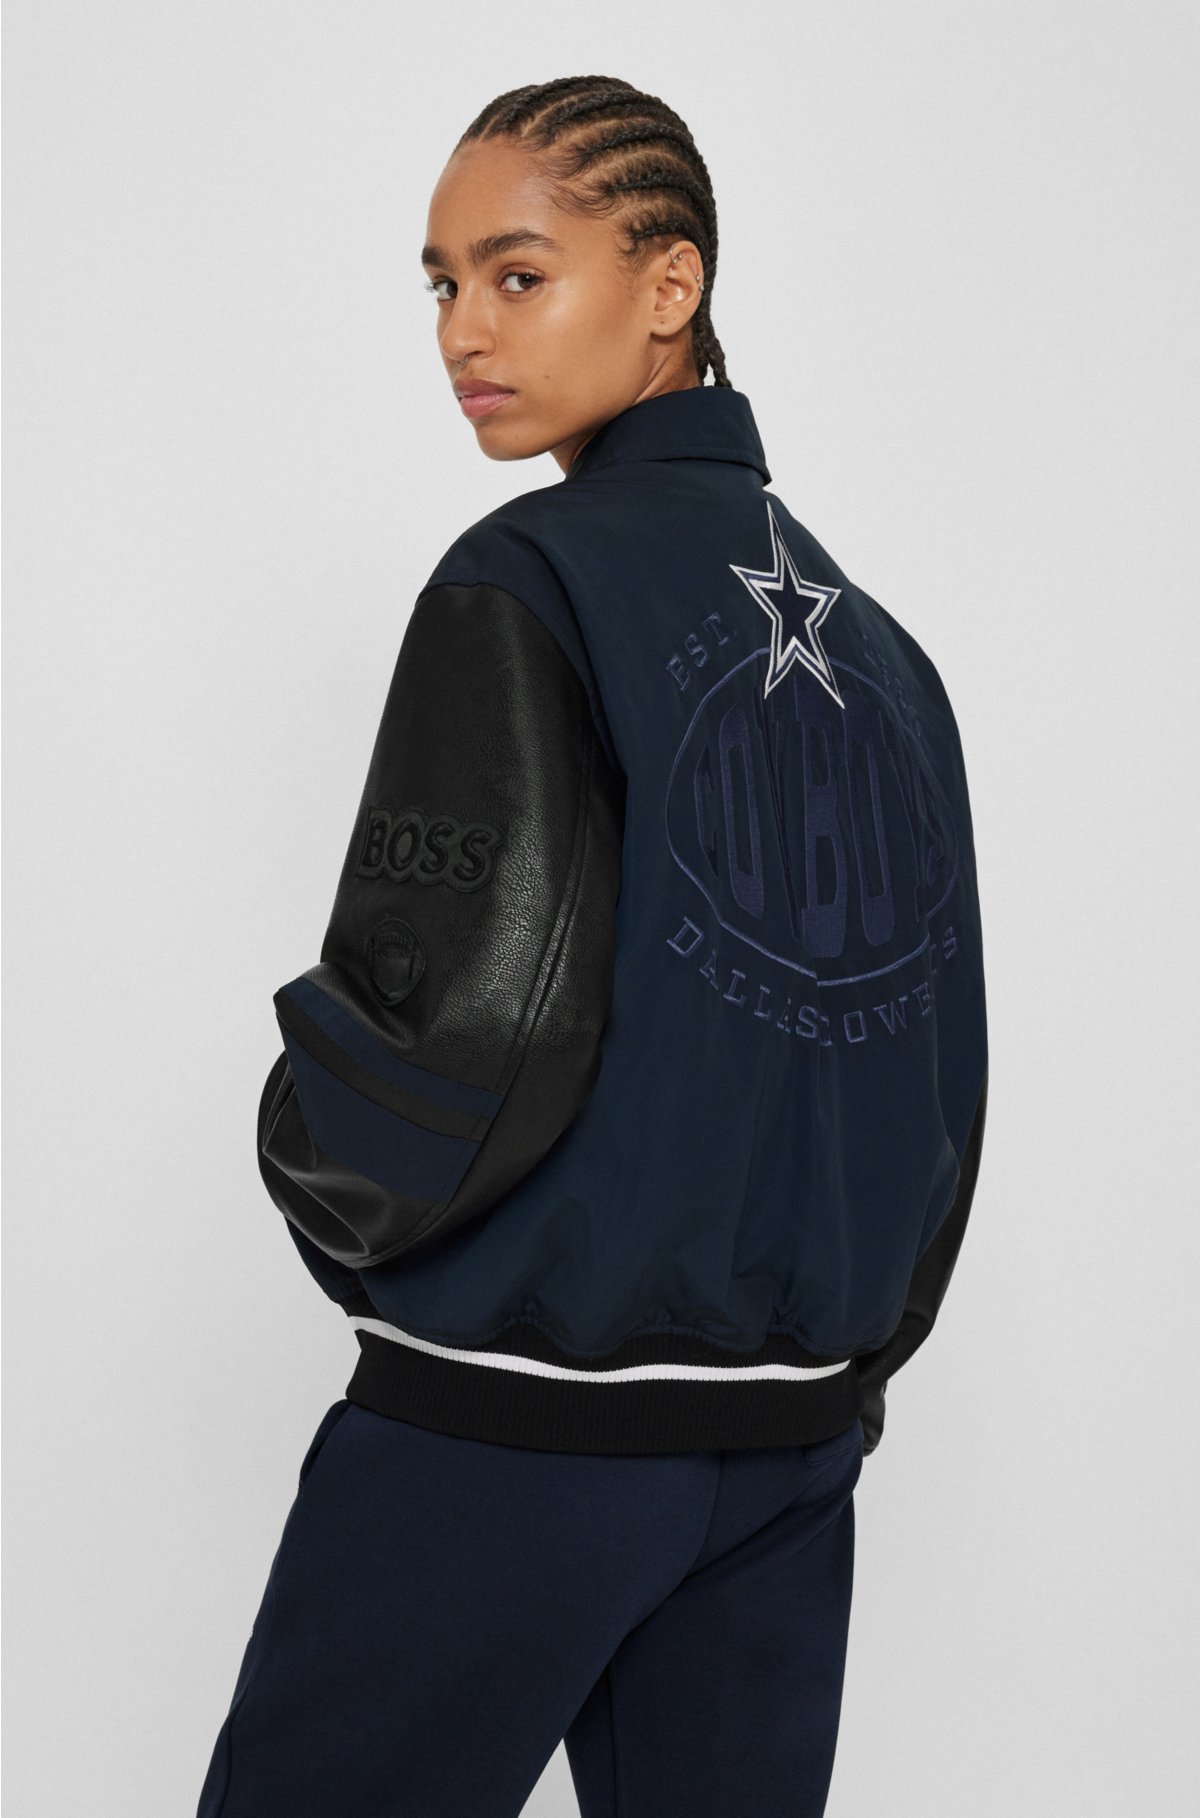  BOSS x NFL water-repellent bomber jacket with collaborative branding, Cowboys